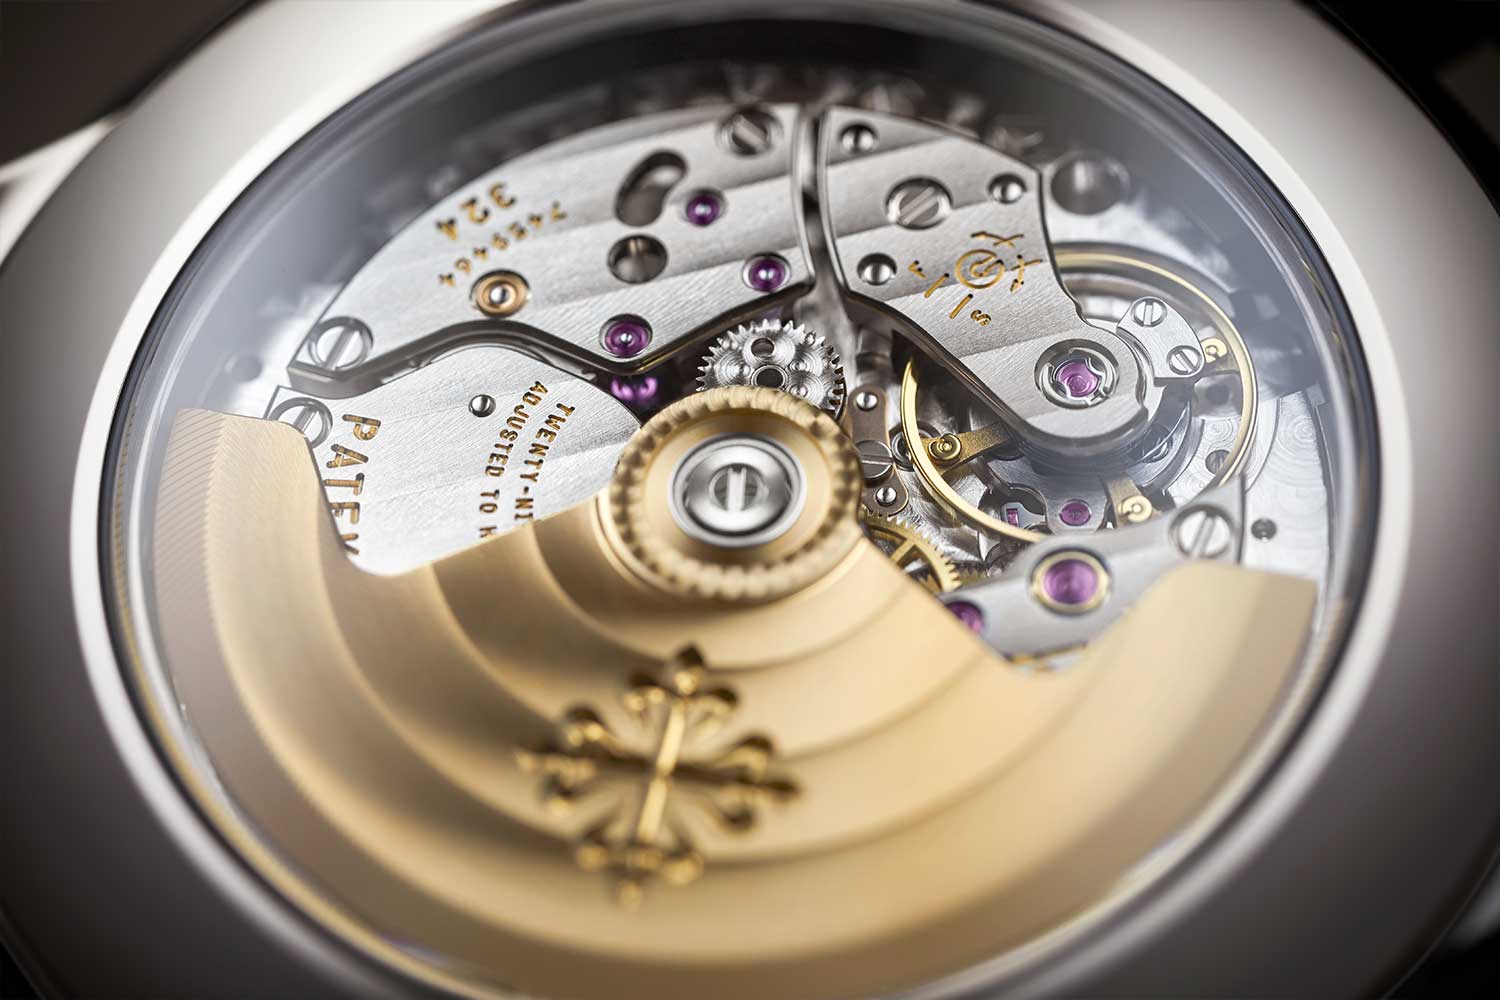 Patek Philippe 5320G-011 – Perpetual Calendar is powered by the self-winding caliber 324 S Q